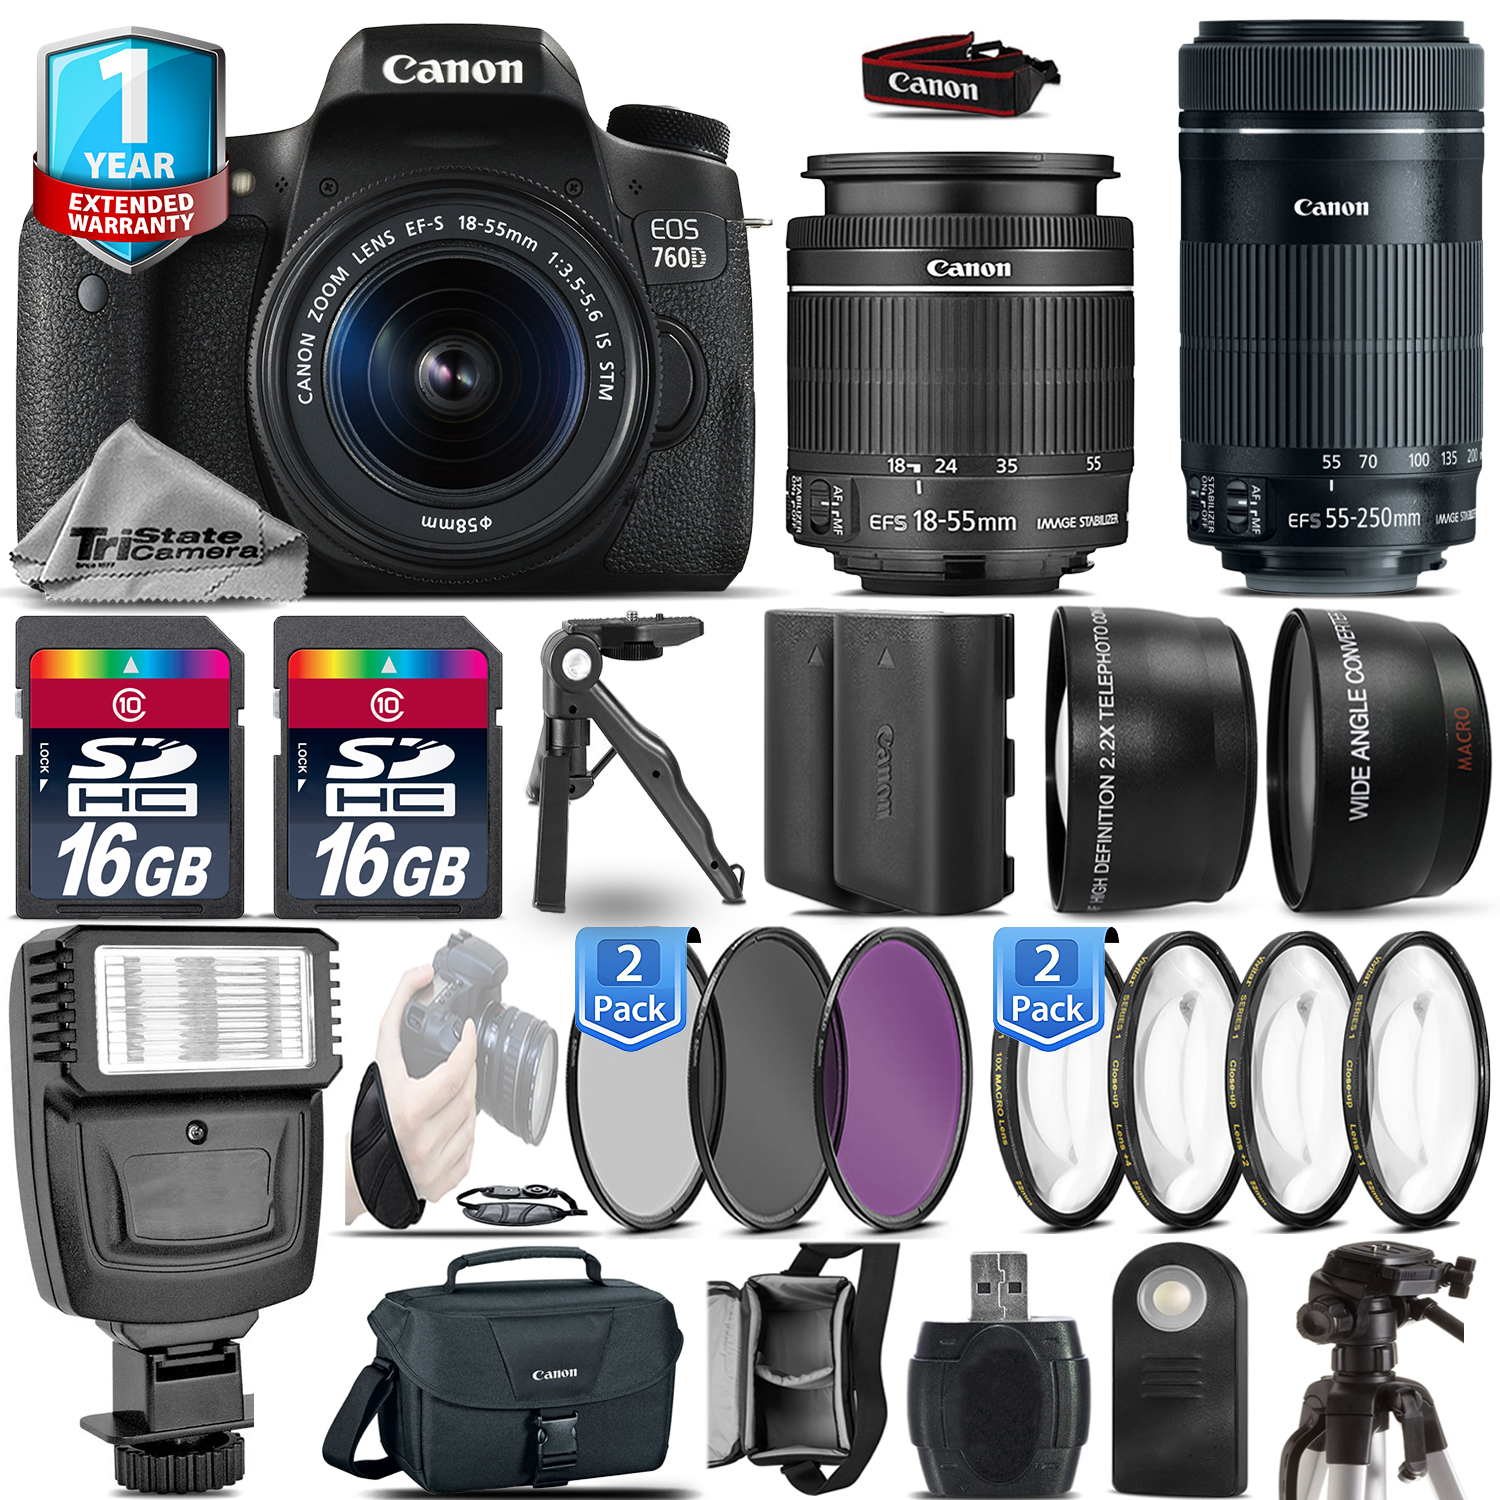 EOS Rebel 760D Camera + 18-55mm IS + 55-200mm IS + EXT BAT +1yr Warranty *FREE SHIPPING*